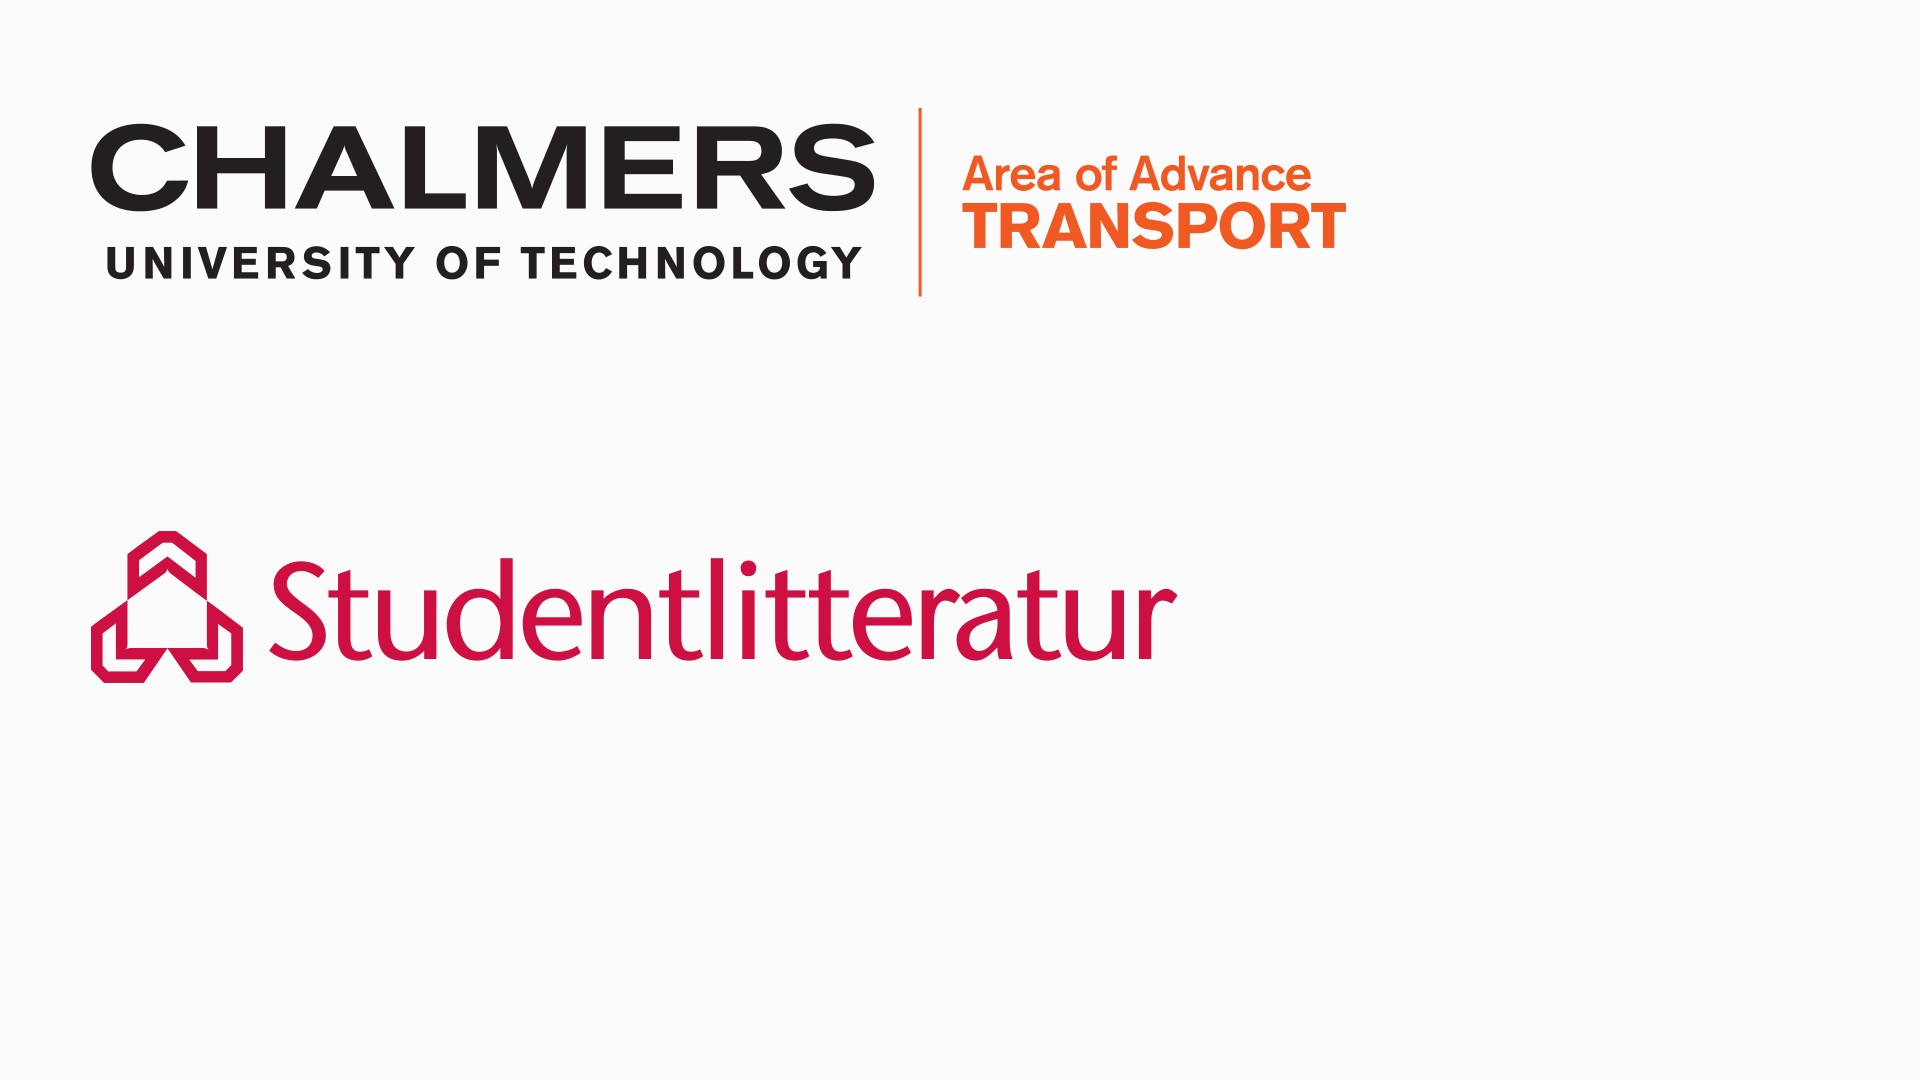 The logotypes of the conference sponsors: Chalmers Transport Science Area of Advance, and Studentlitteratur.